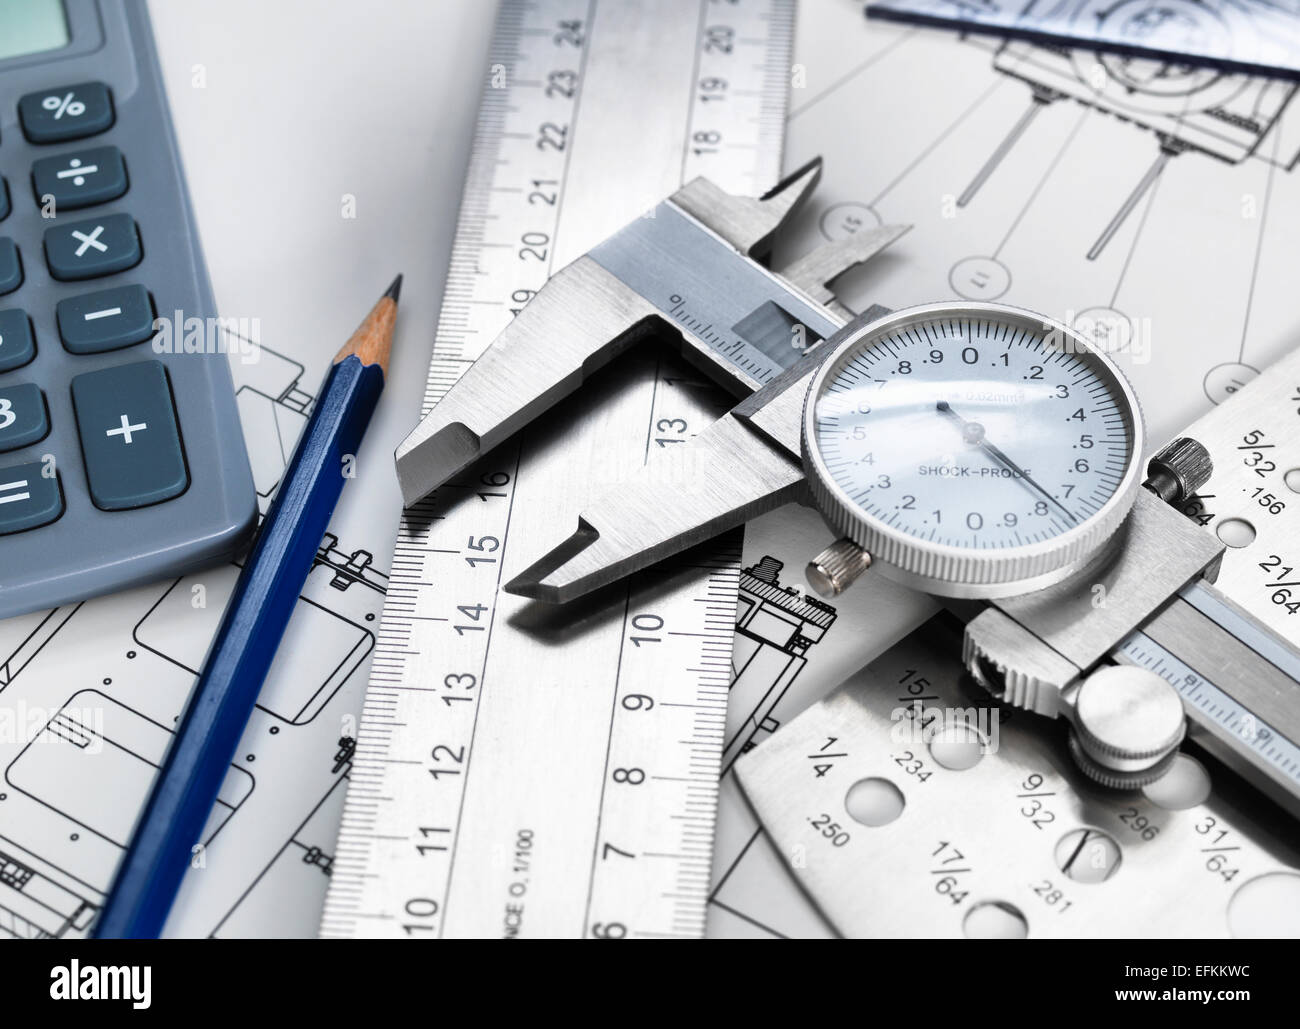 Dial caliper and engineering measurement equipment, sitting on technical drawing Stock Photo